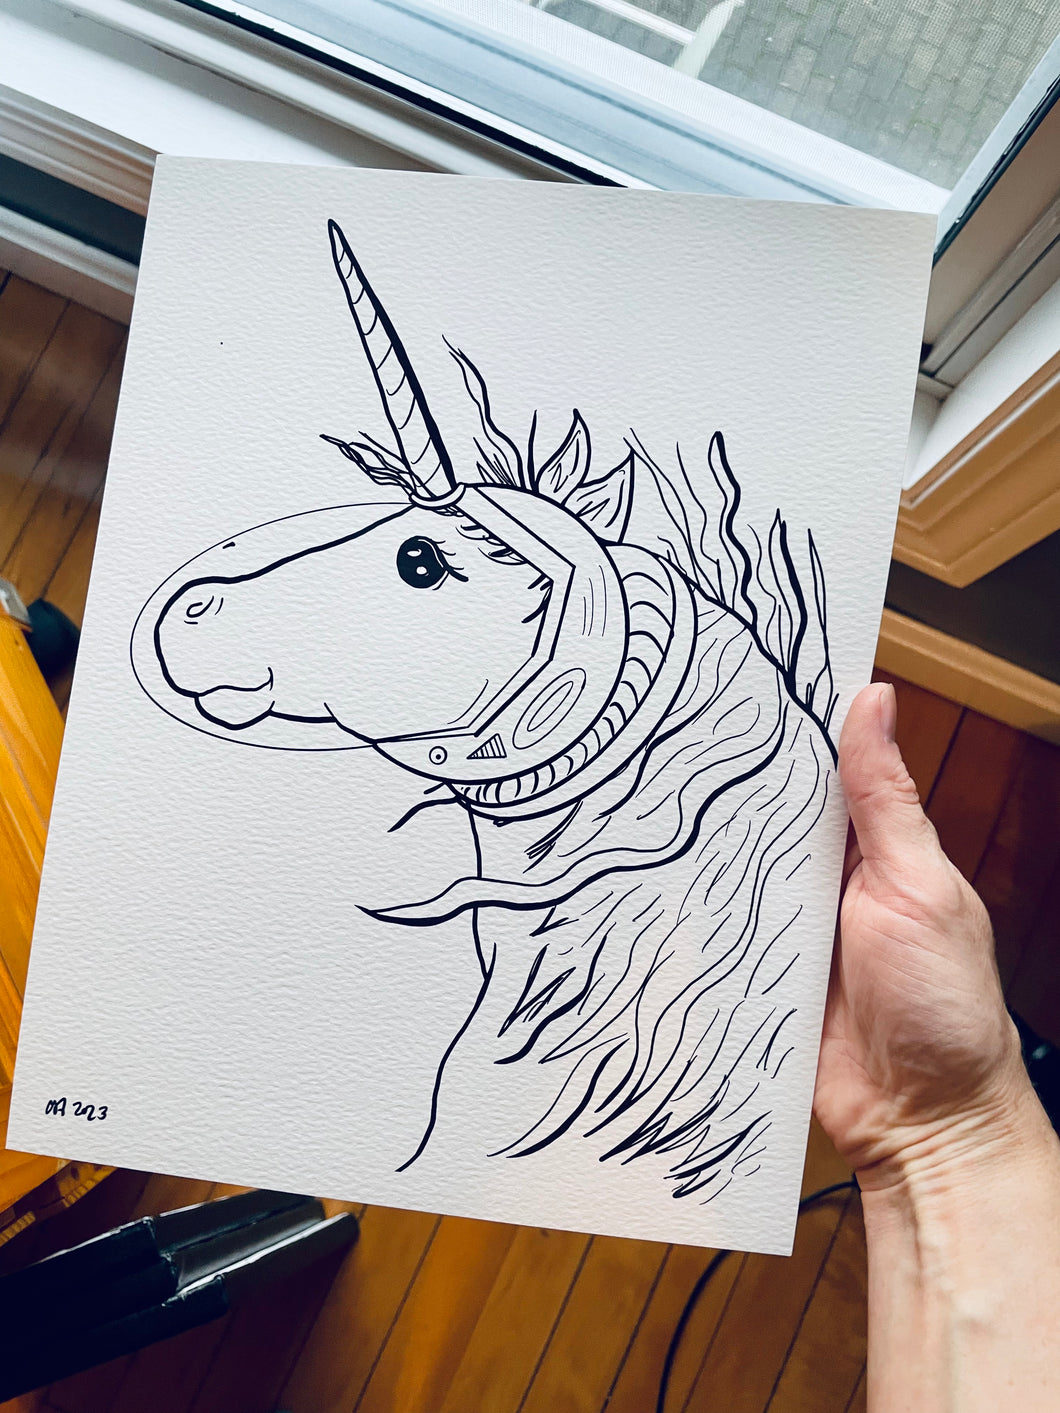 Unicorn coloring page!